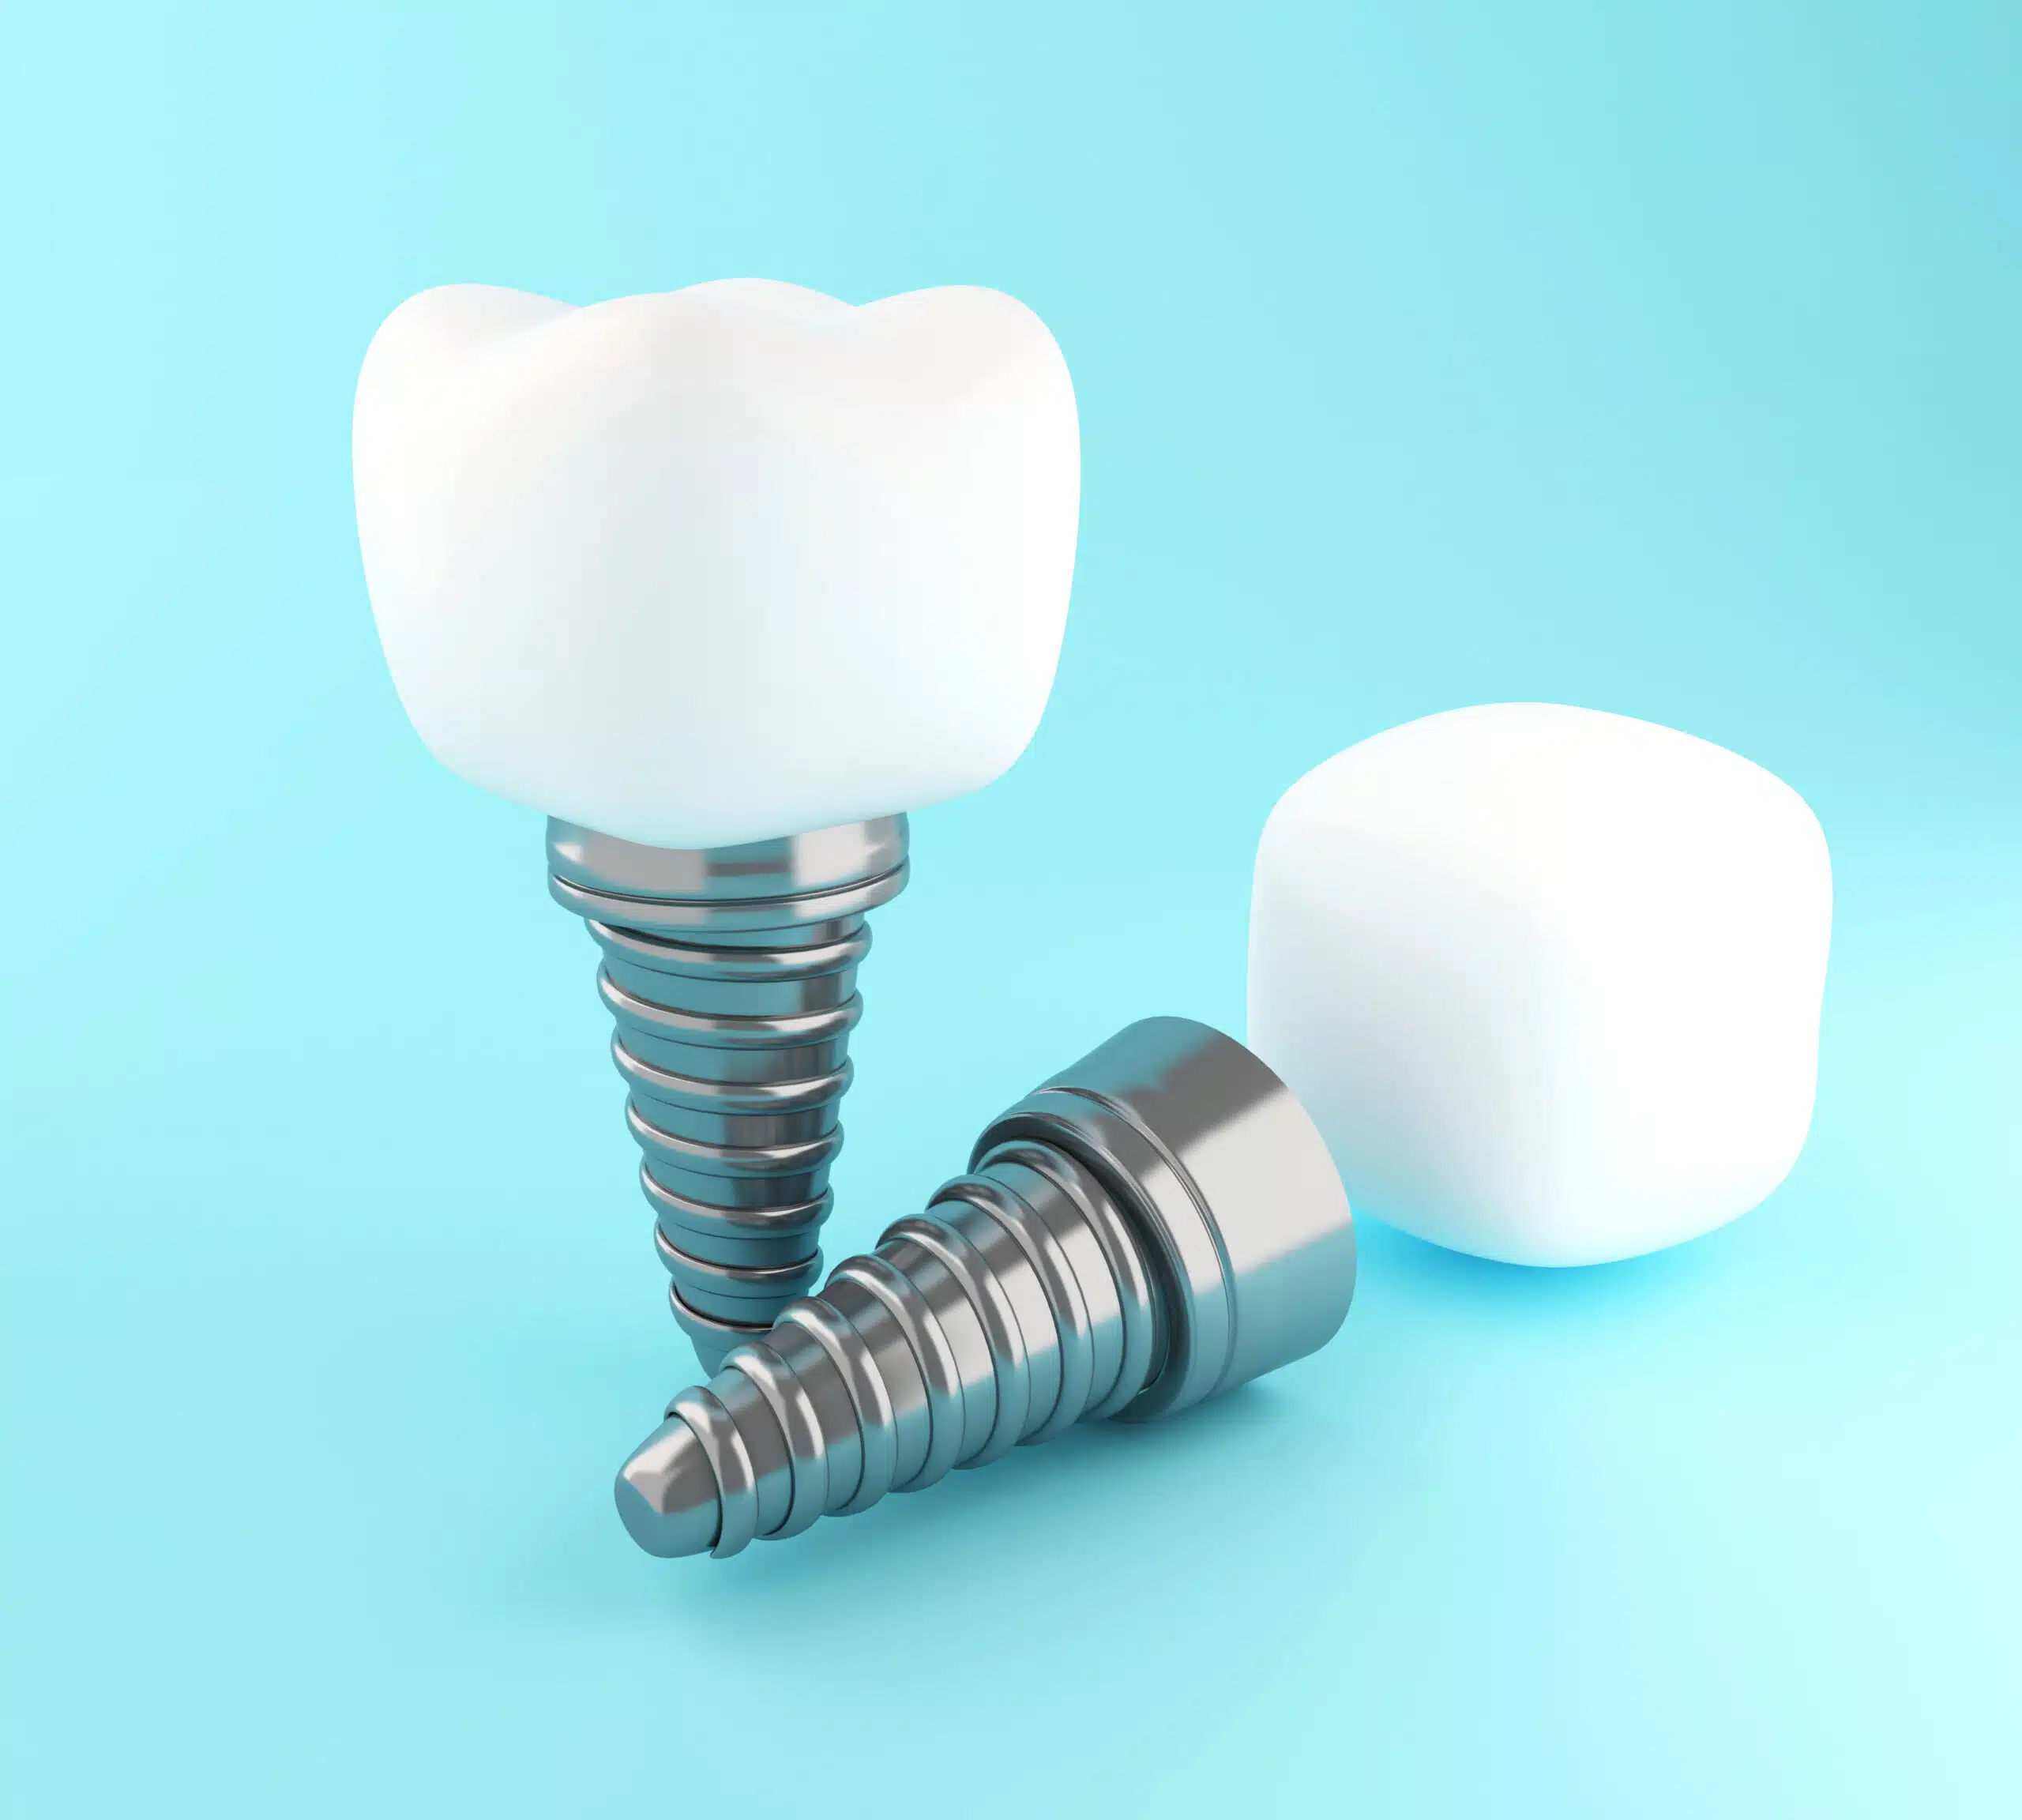 Our team provides dental implants, which are designed to provide a secure and lasting replacement for missing teeth.